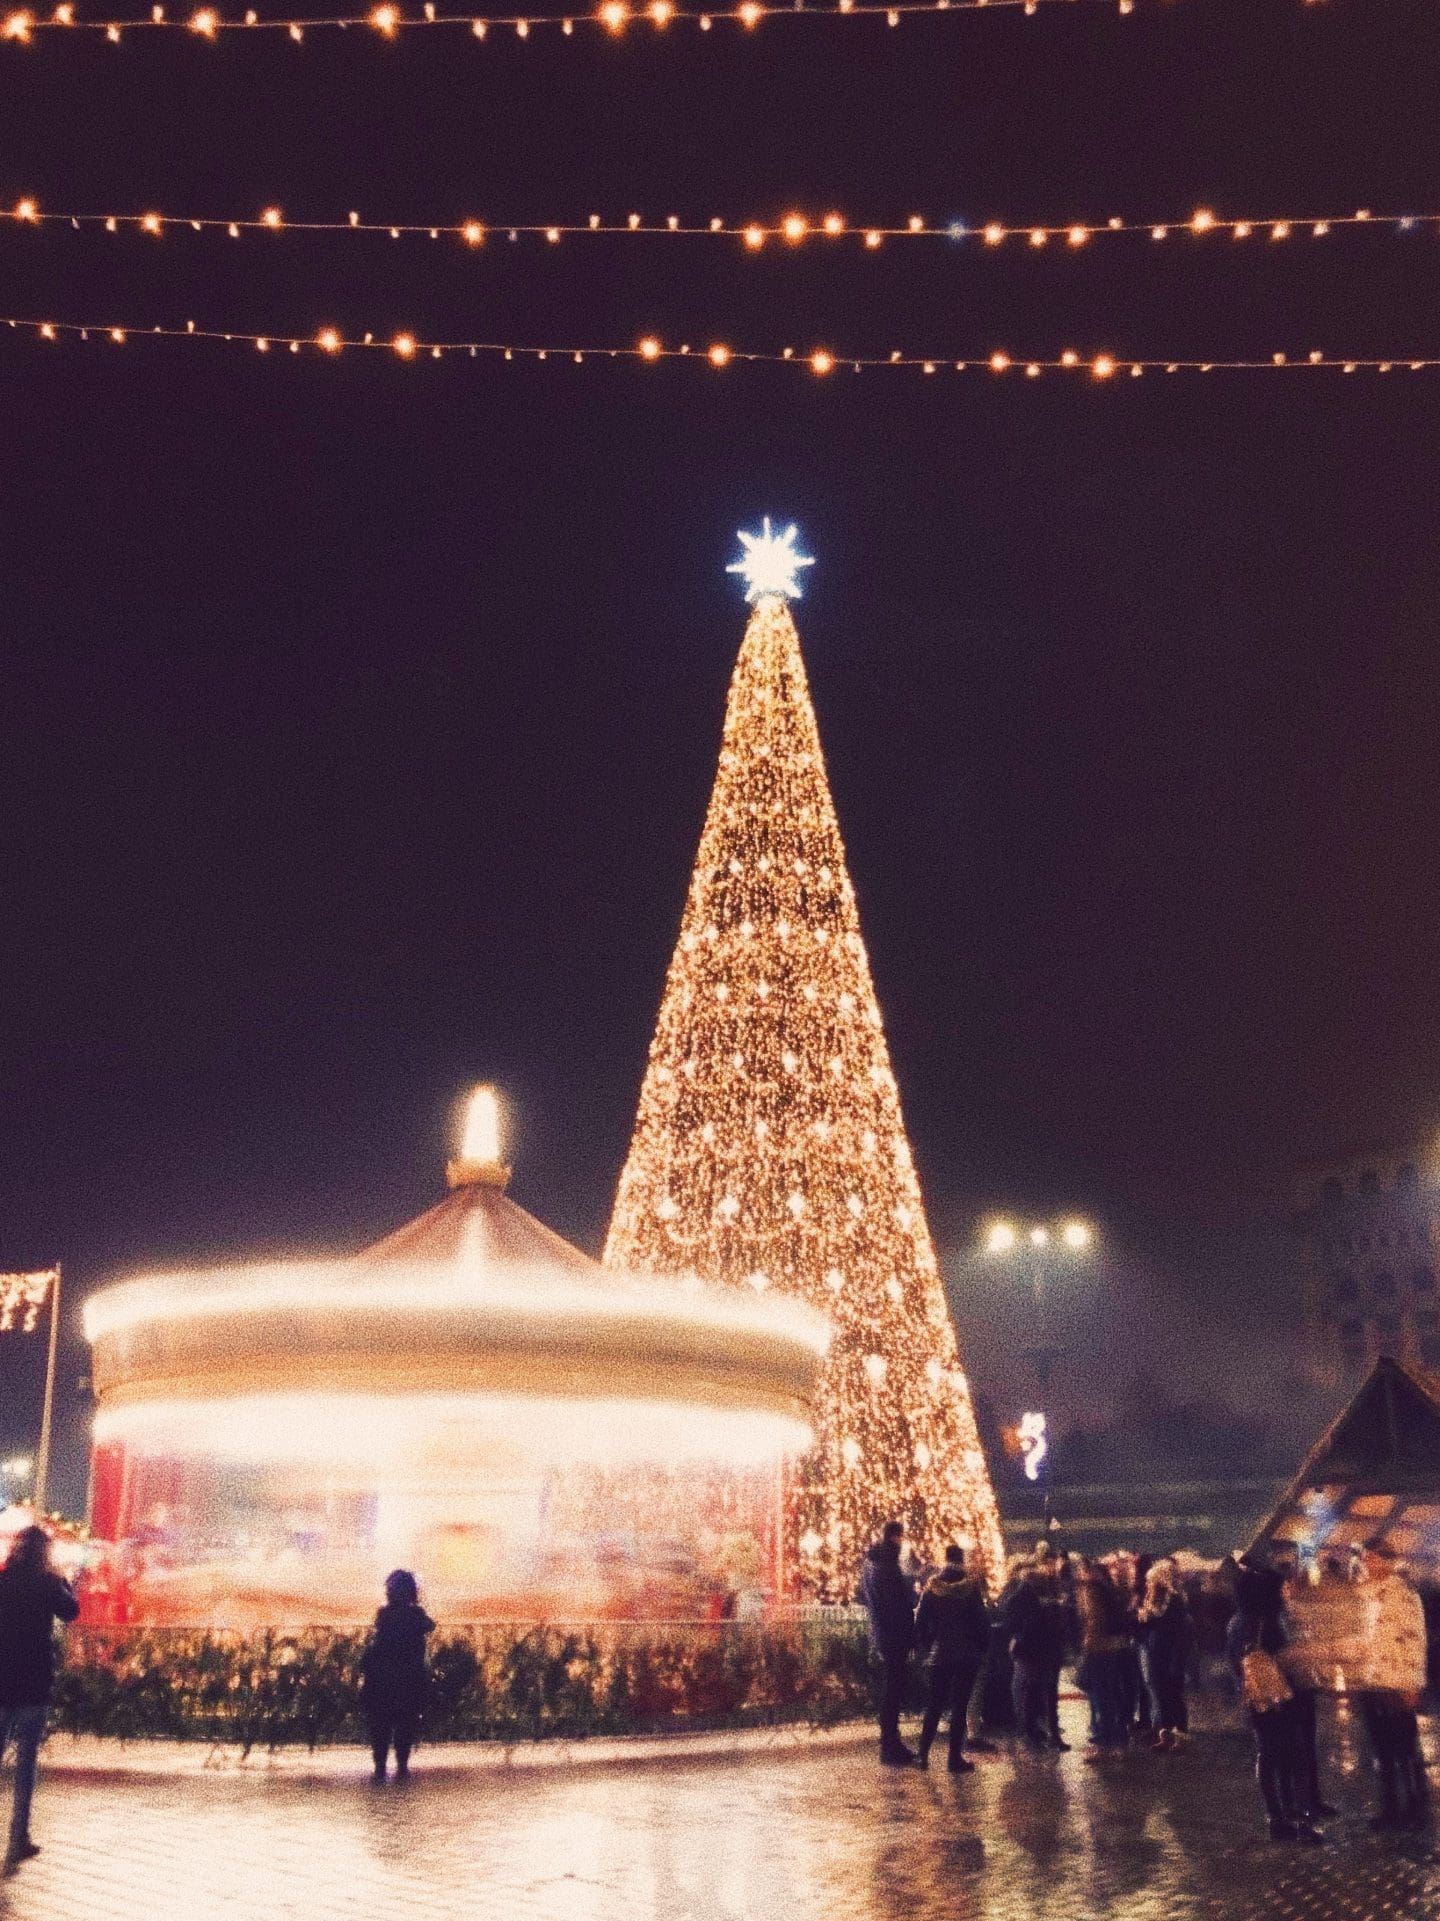 The 5 best Christmas Markets in Germany in 2019